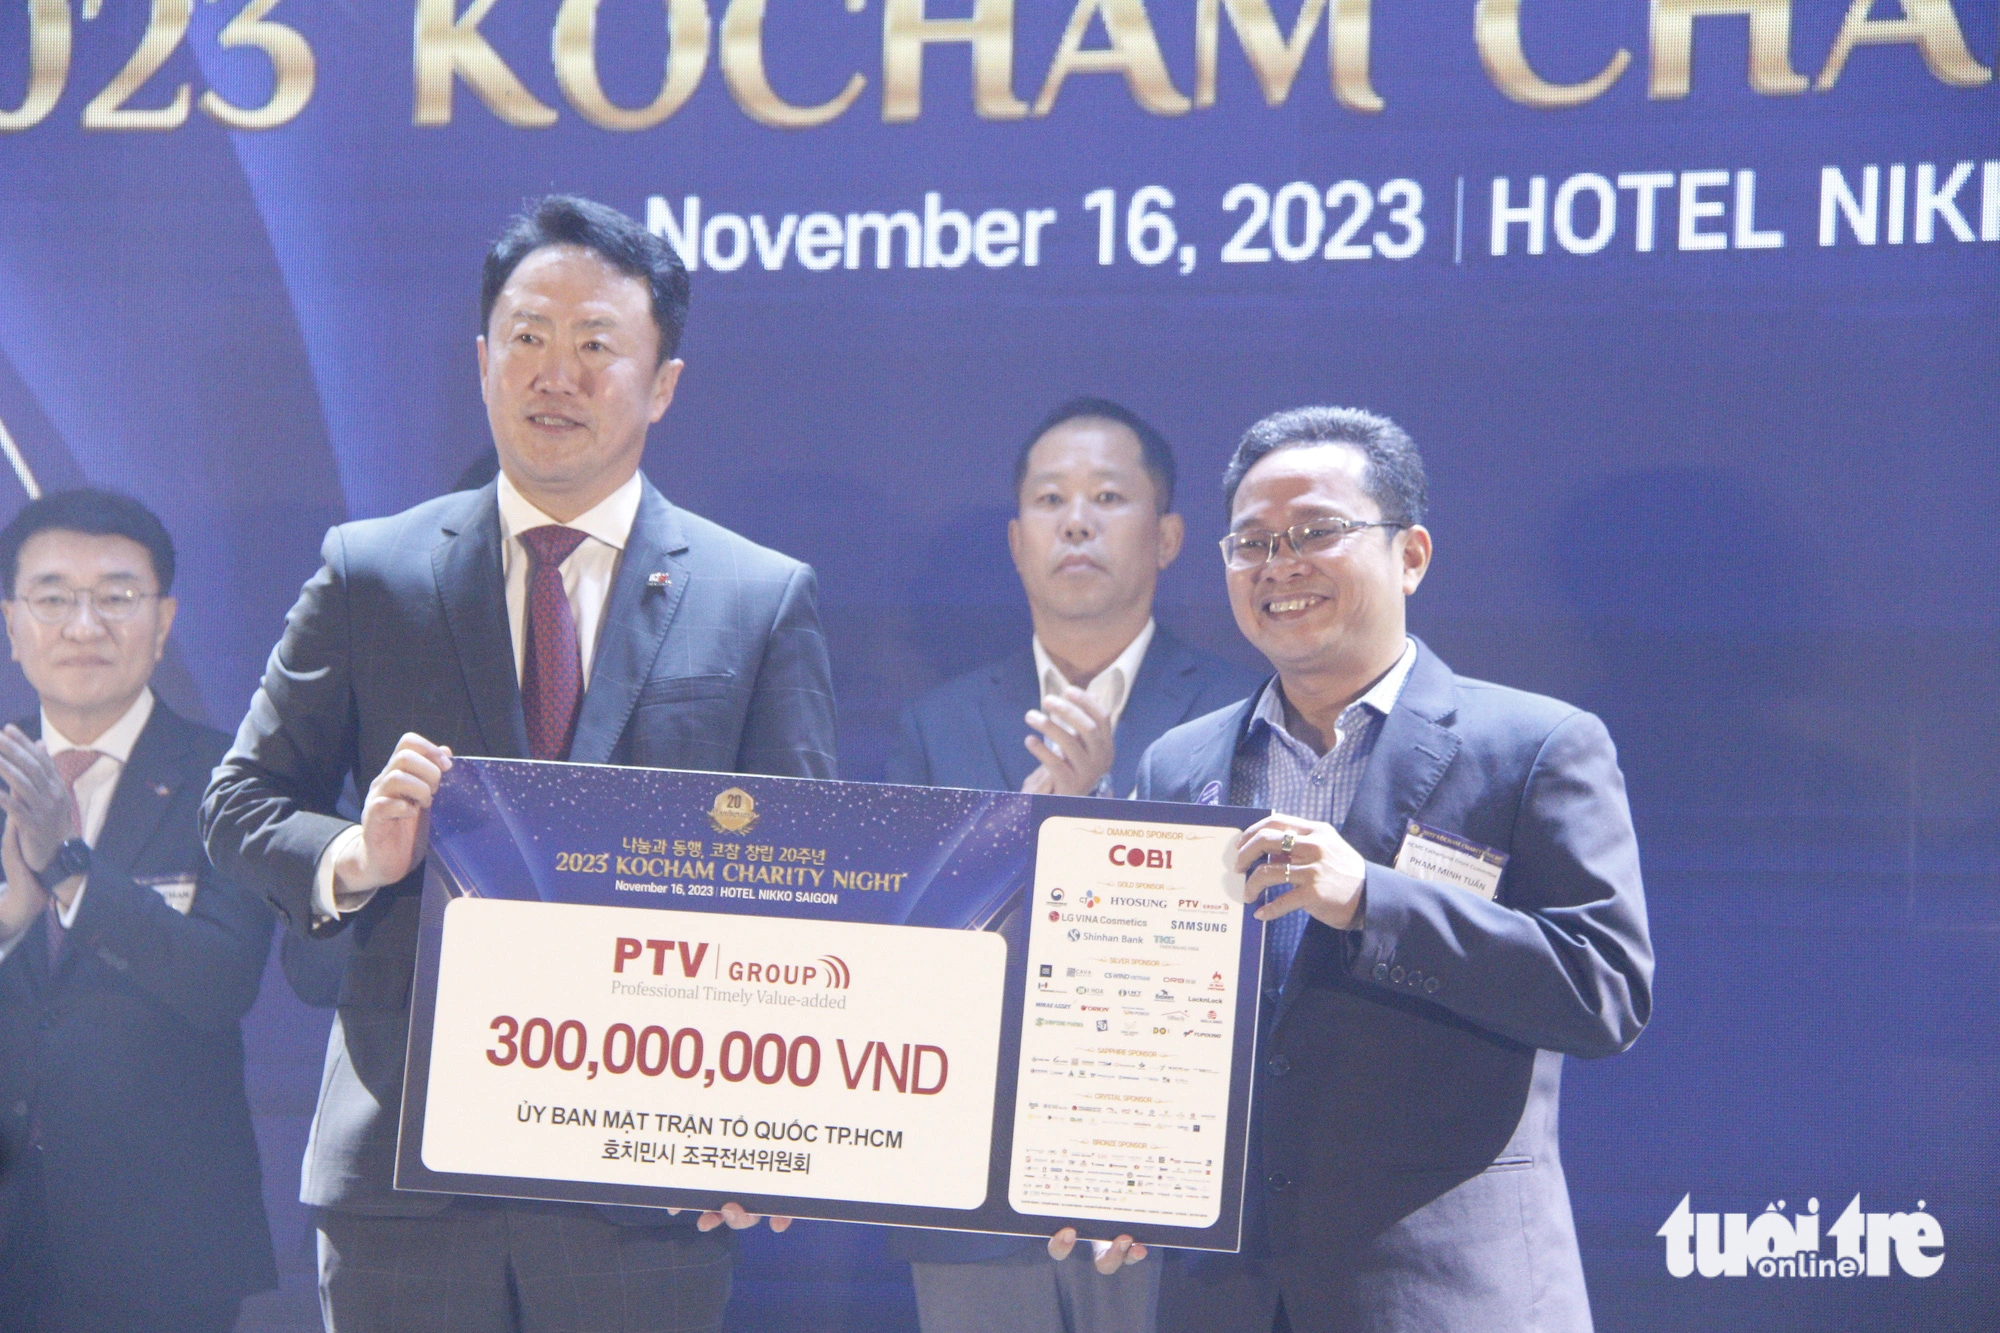 Korean Association of Commerce and Industry awarded 300 million VND to Vietnam Fatherland Front Committee in Ho Chi Minh City